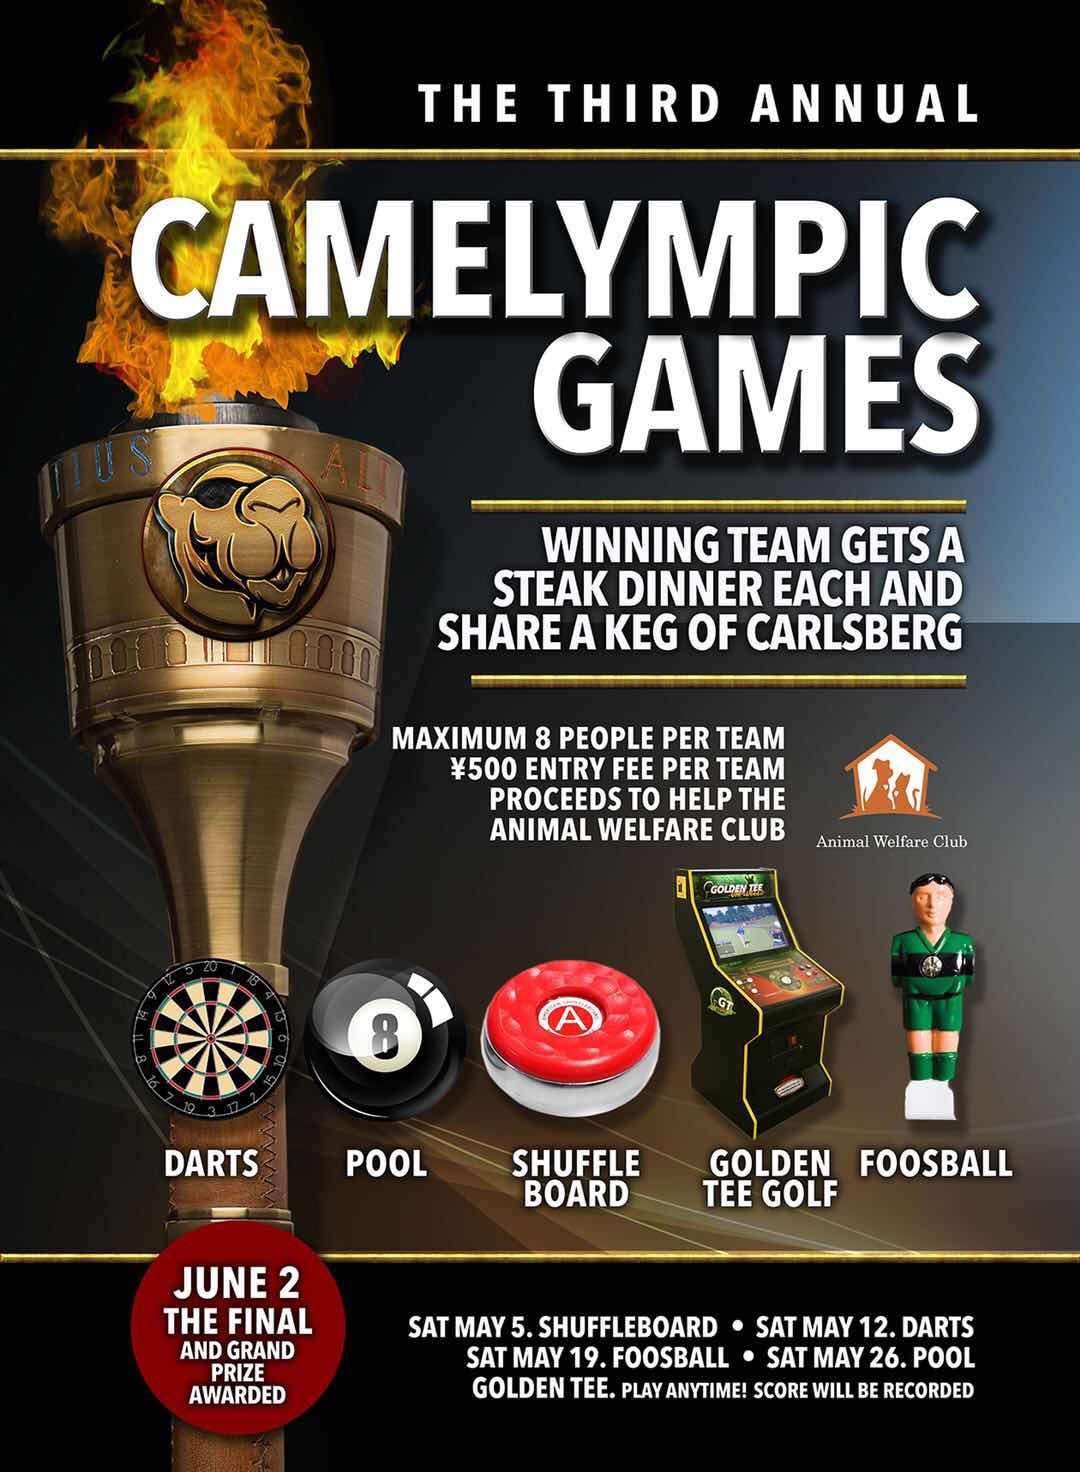 Camelympic Games